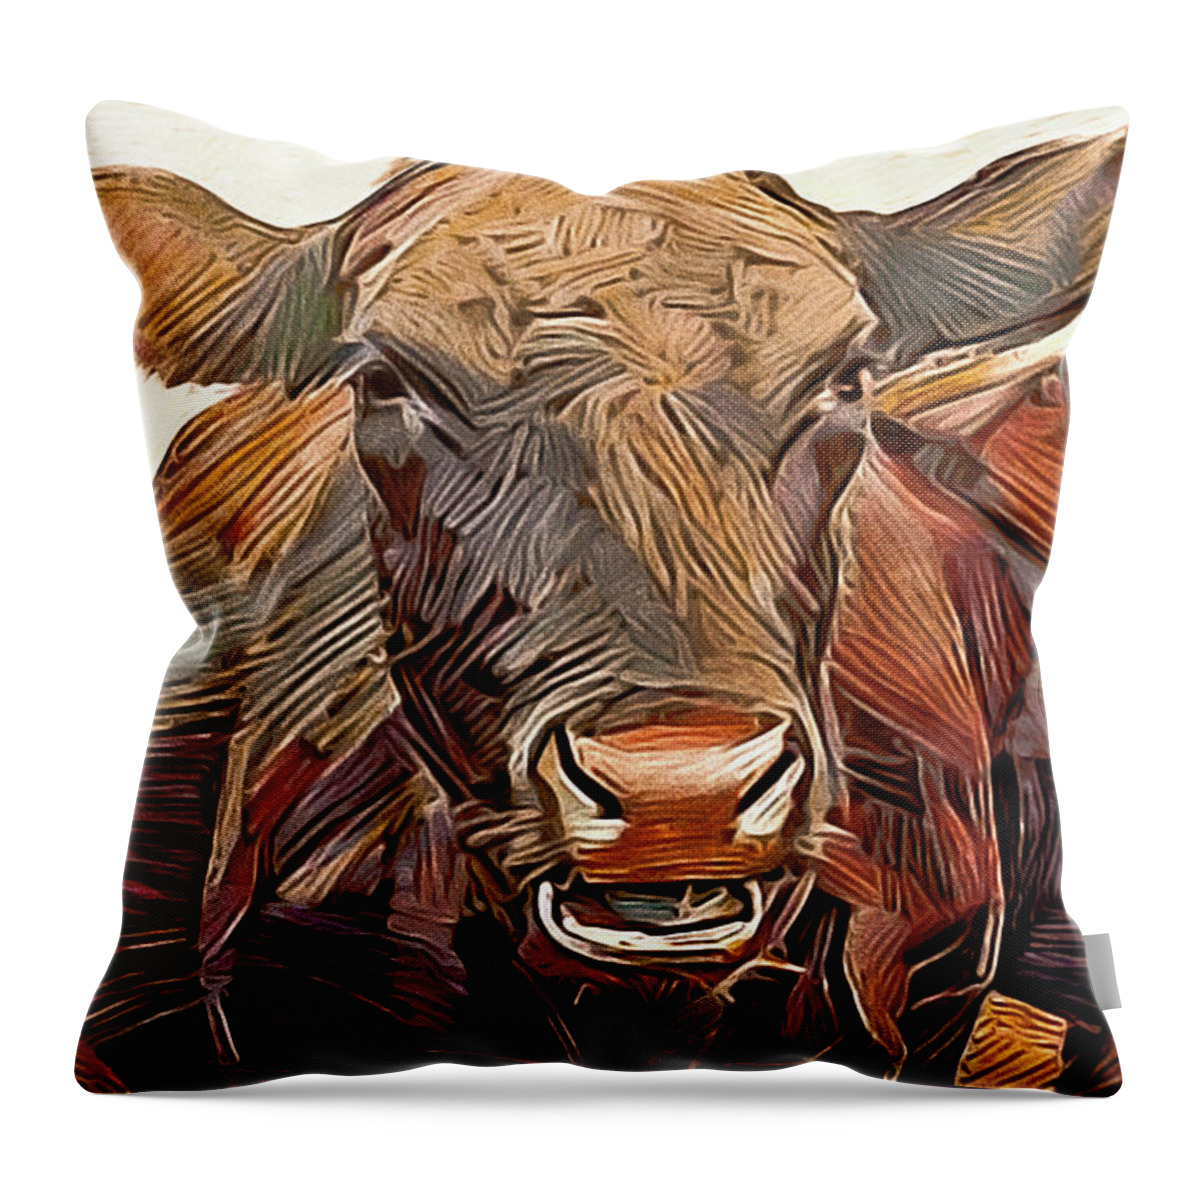 Herd Of Cows Throw Pillow featuring the mixed media Chester County Cattle by Susan Maxwell Schmidt